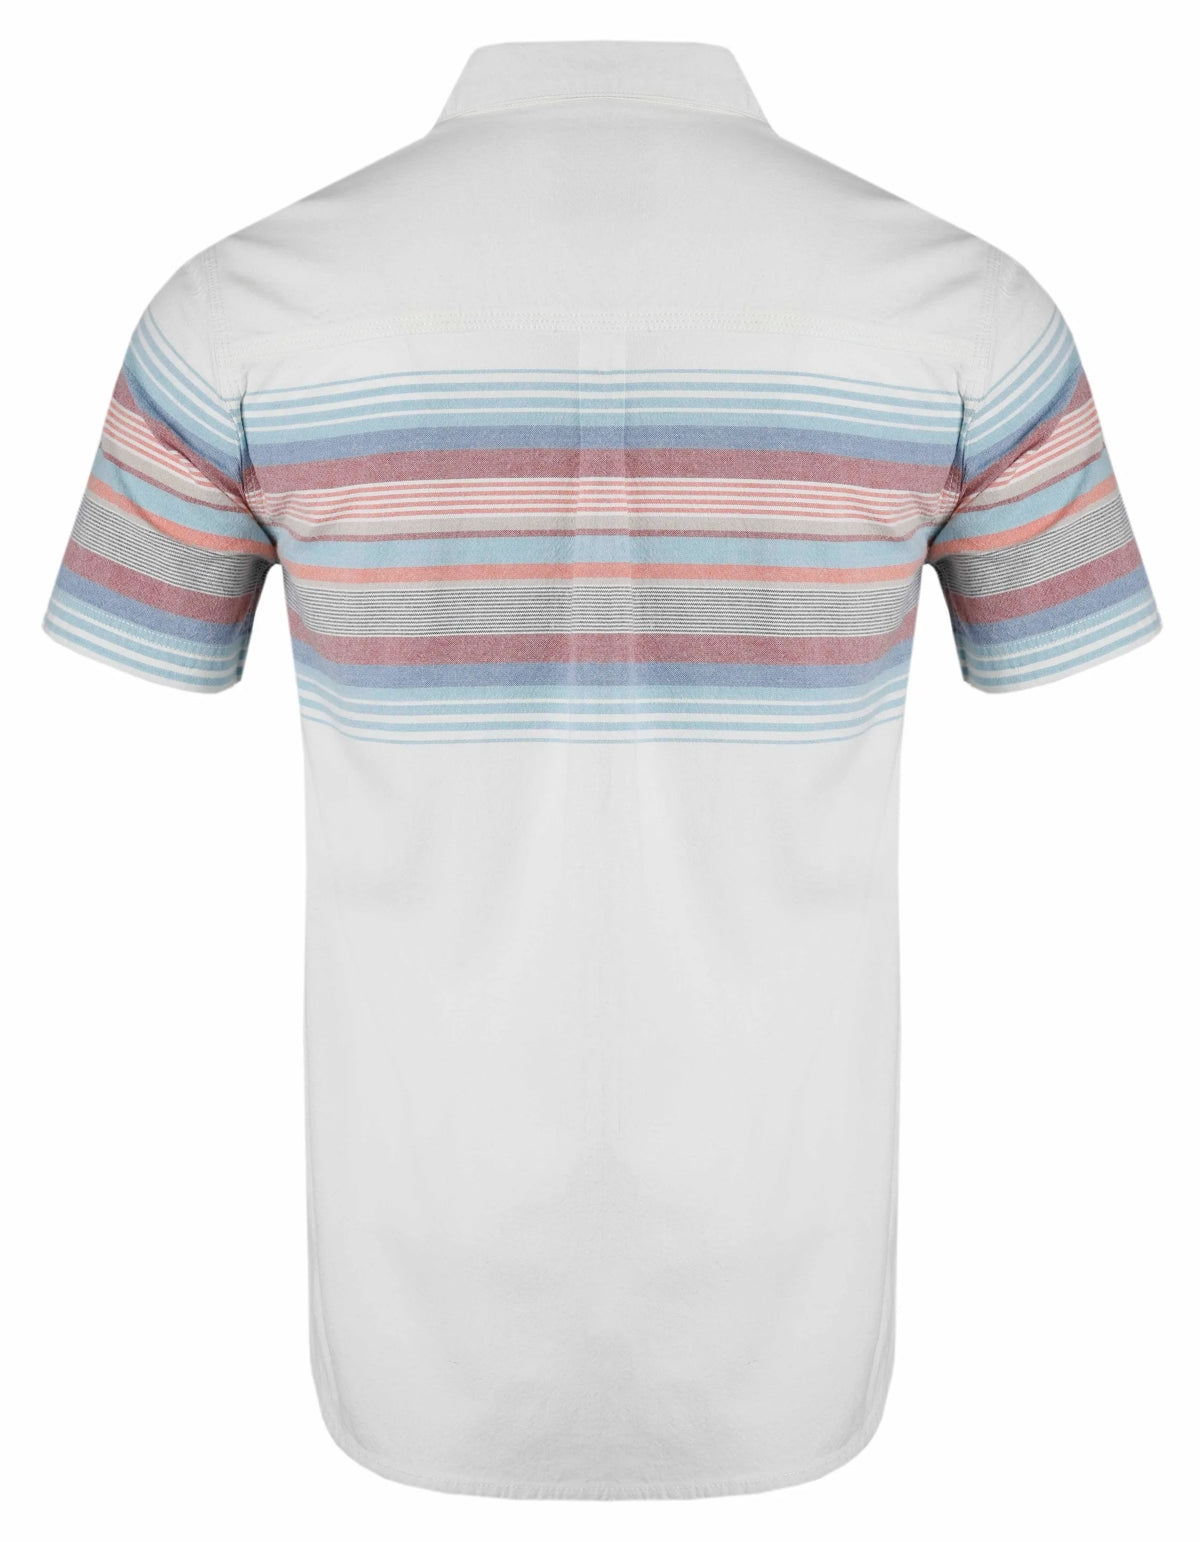 Men's Dusty White Bowfell short sleeve shirt from Weird Fish with chest stripe pattern.